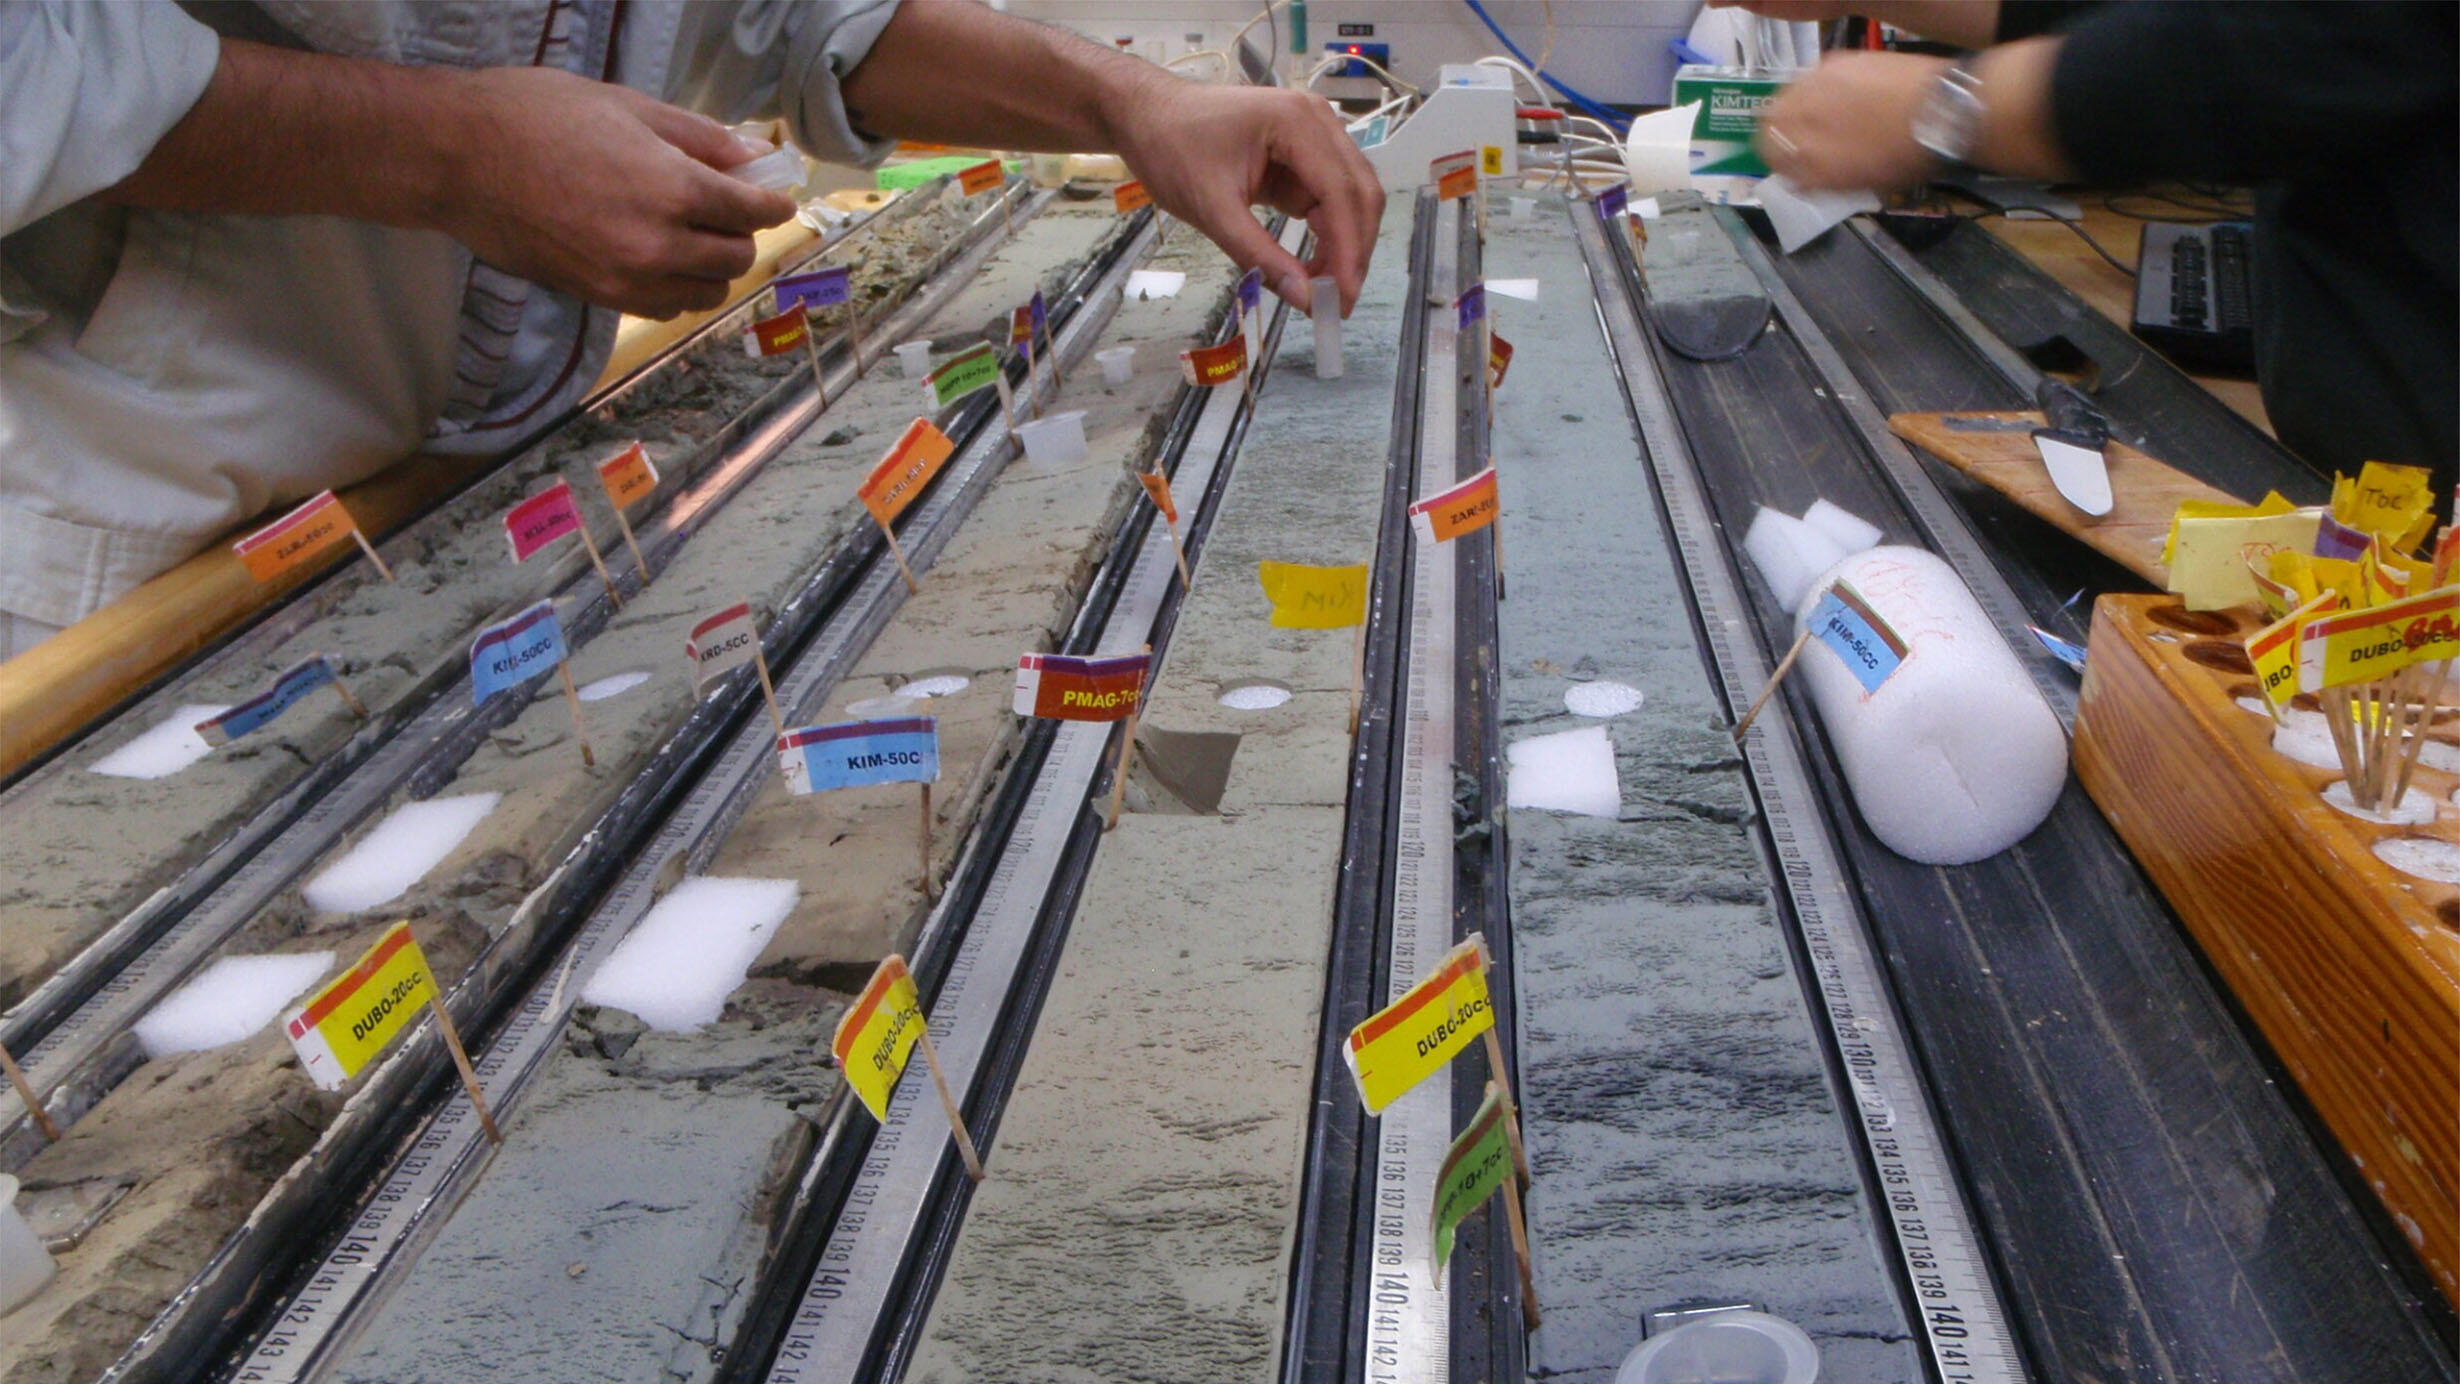 Scientists add identification flags to cylindrical rows of clay taken from the sea floor in the South Pacific Gyre.